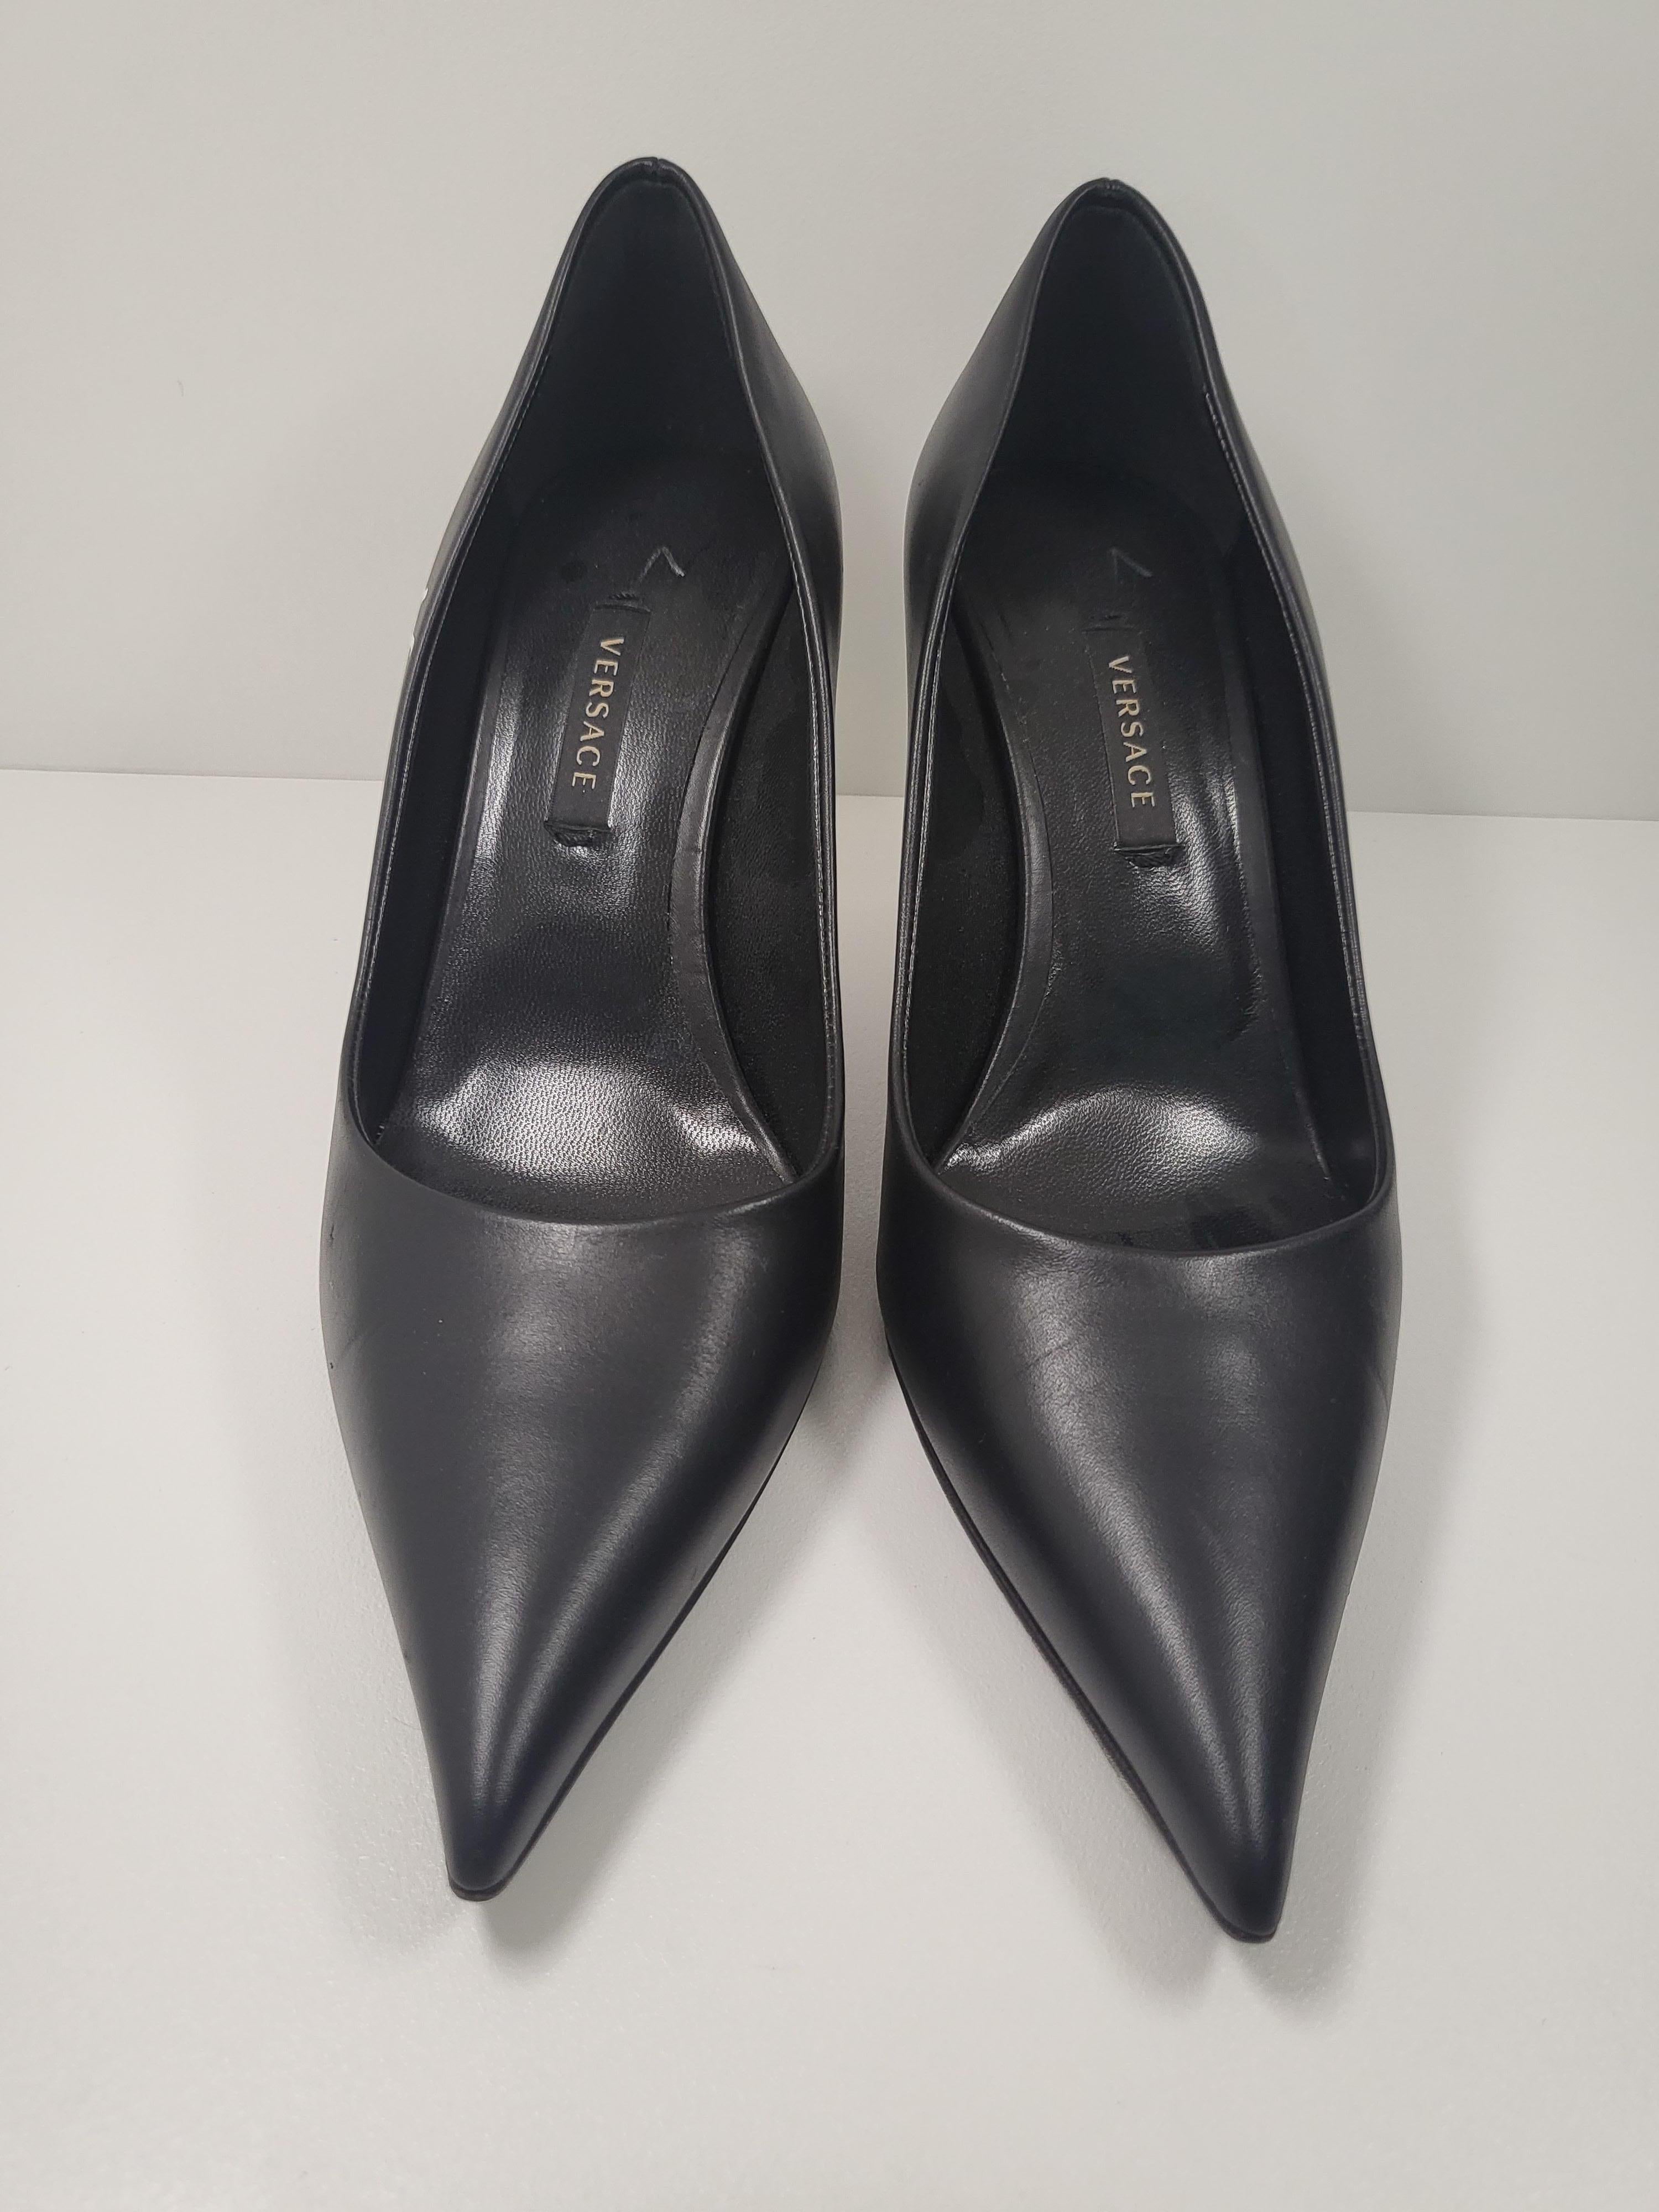 
Indulge in the essence of luxury and iconic elegance with the Gianni Versace White Signed Logo Leather Black Heels. Crafted to perfection, these heels are a testament to the timeless sophistication and exquisite craftsmanship synonymous with the